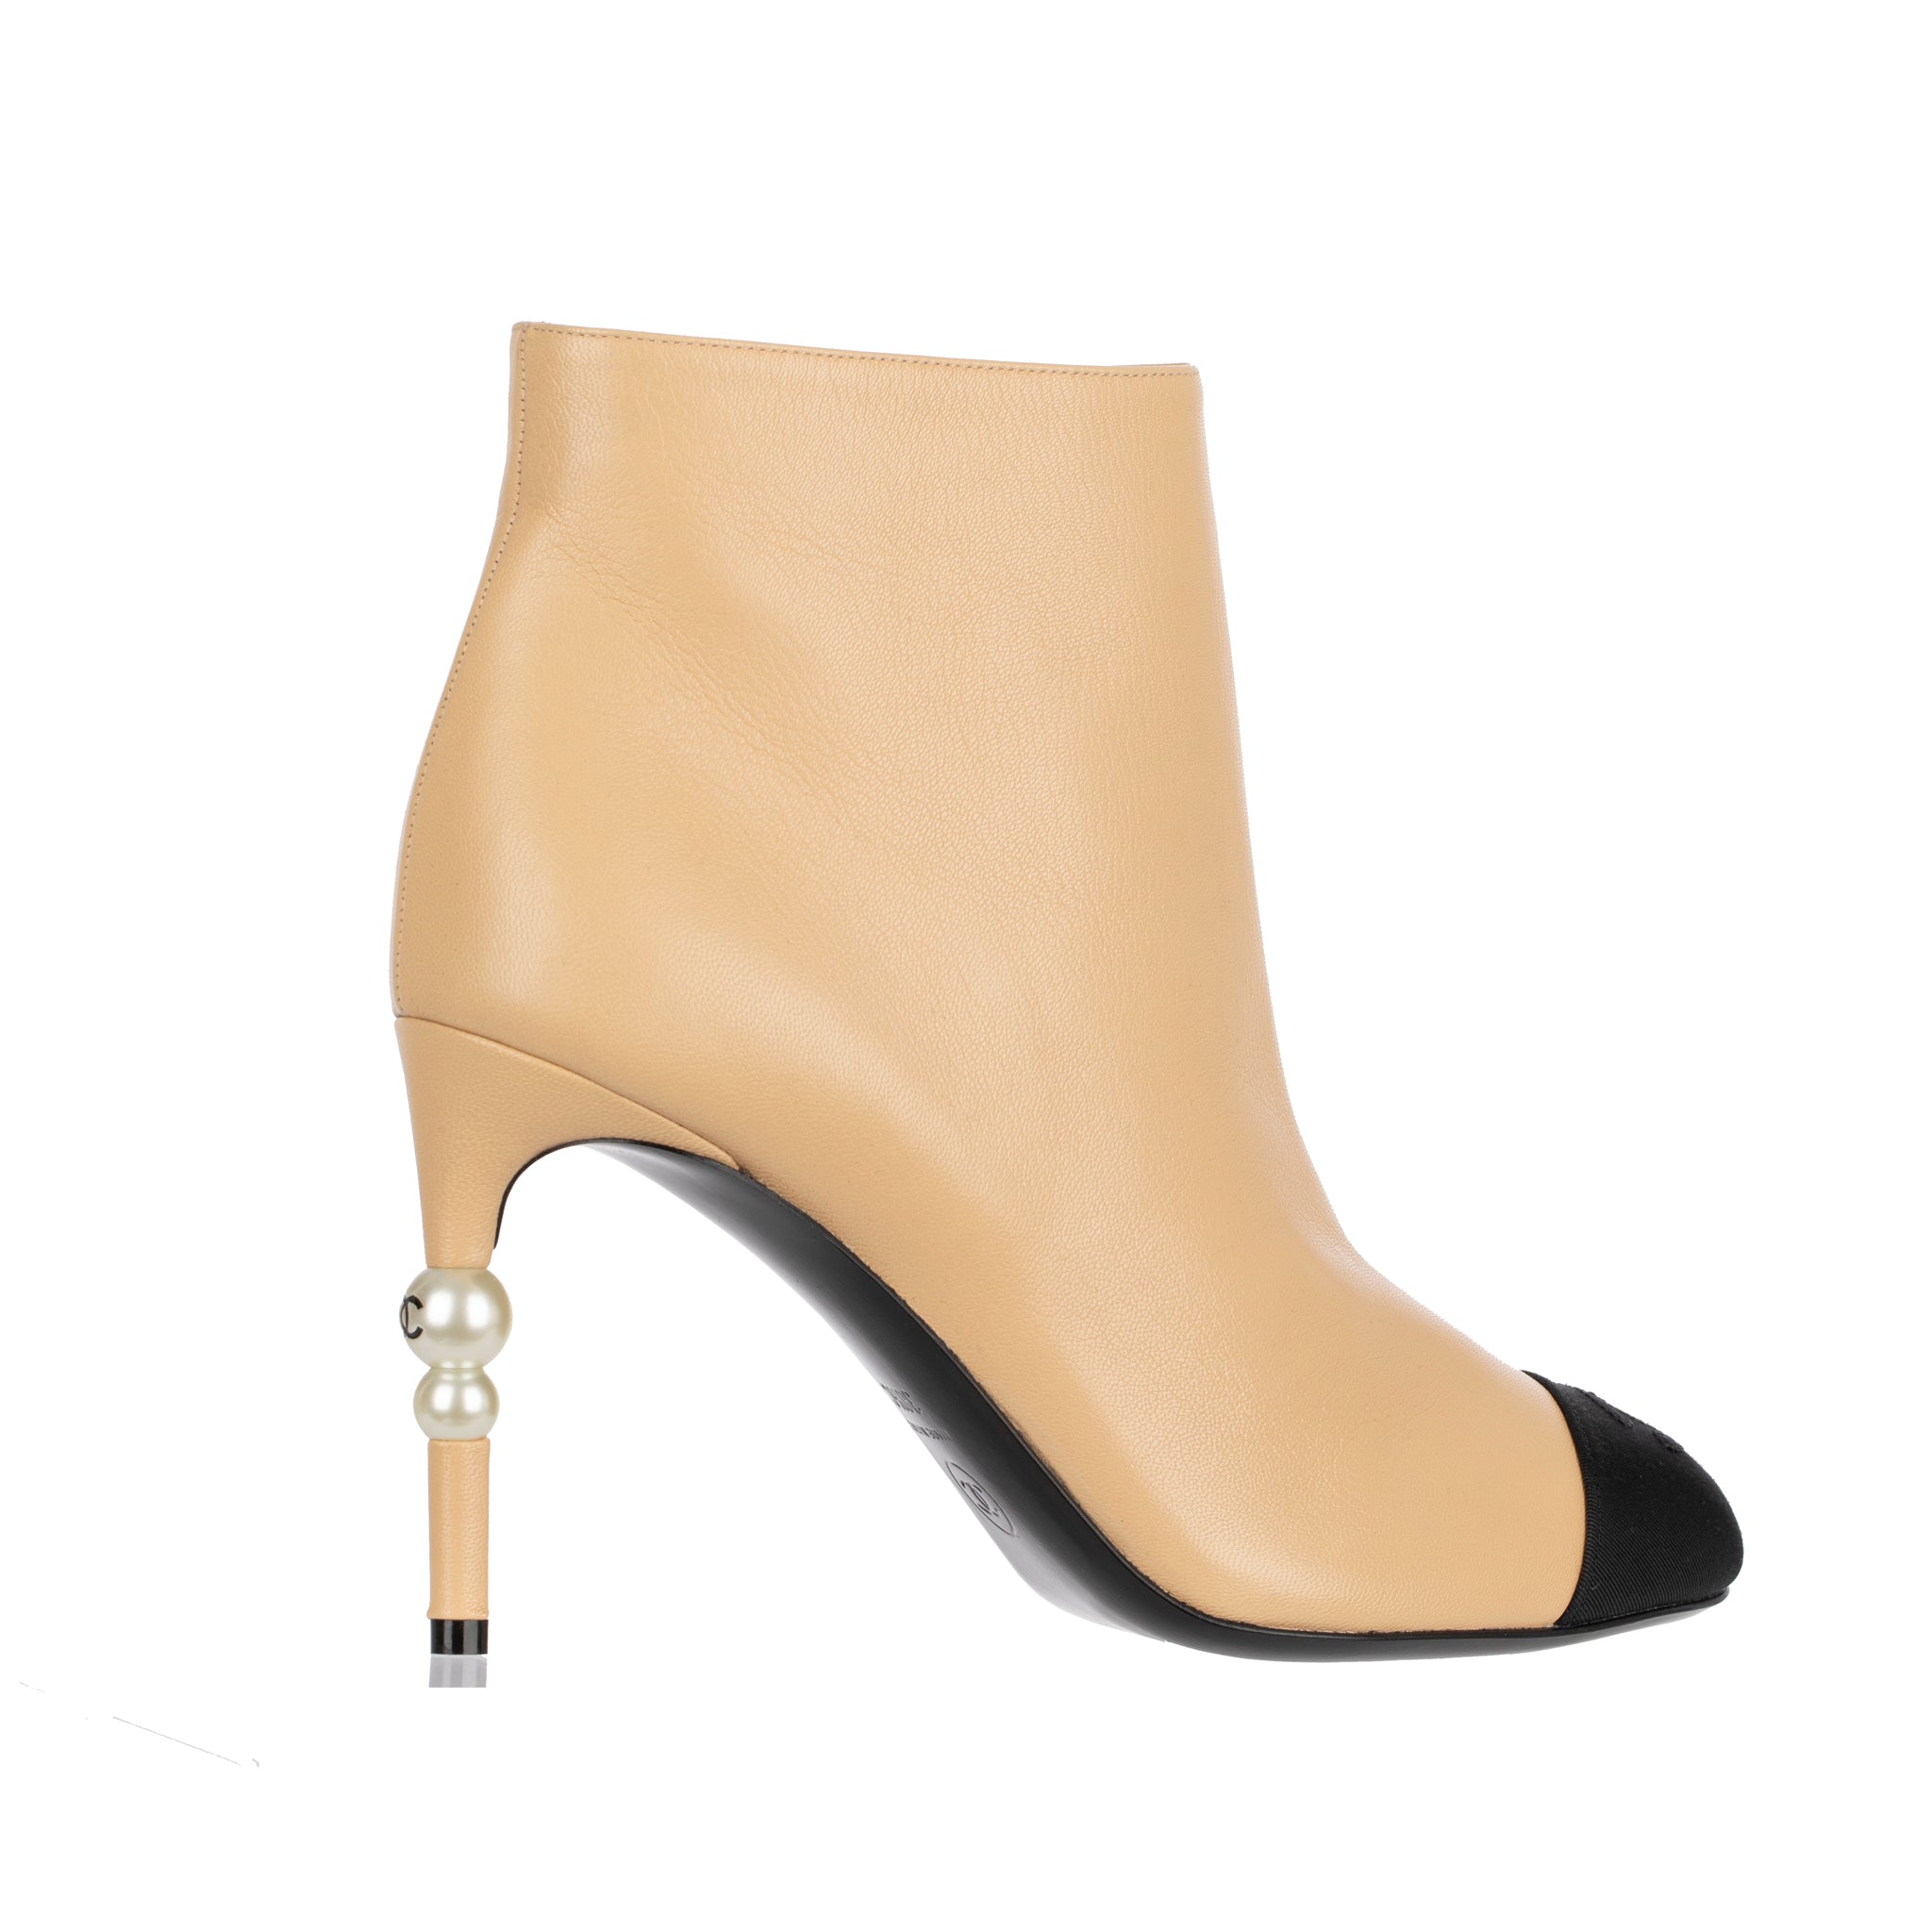 Chanel Ankle Boots Beige & Black With Pearl Details 38.5 FR